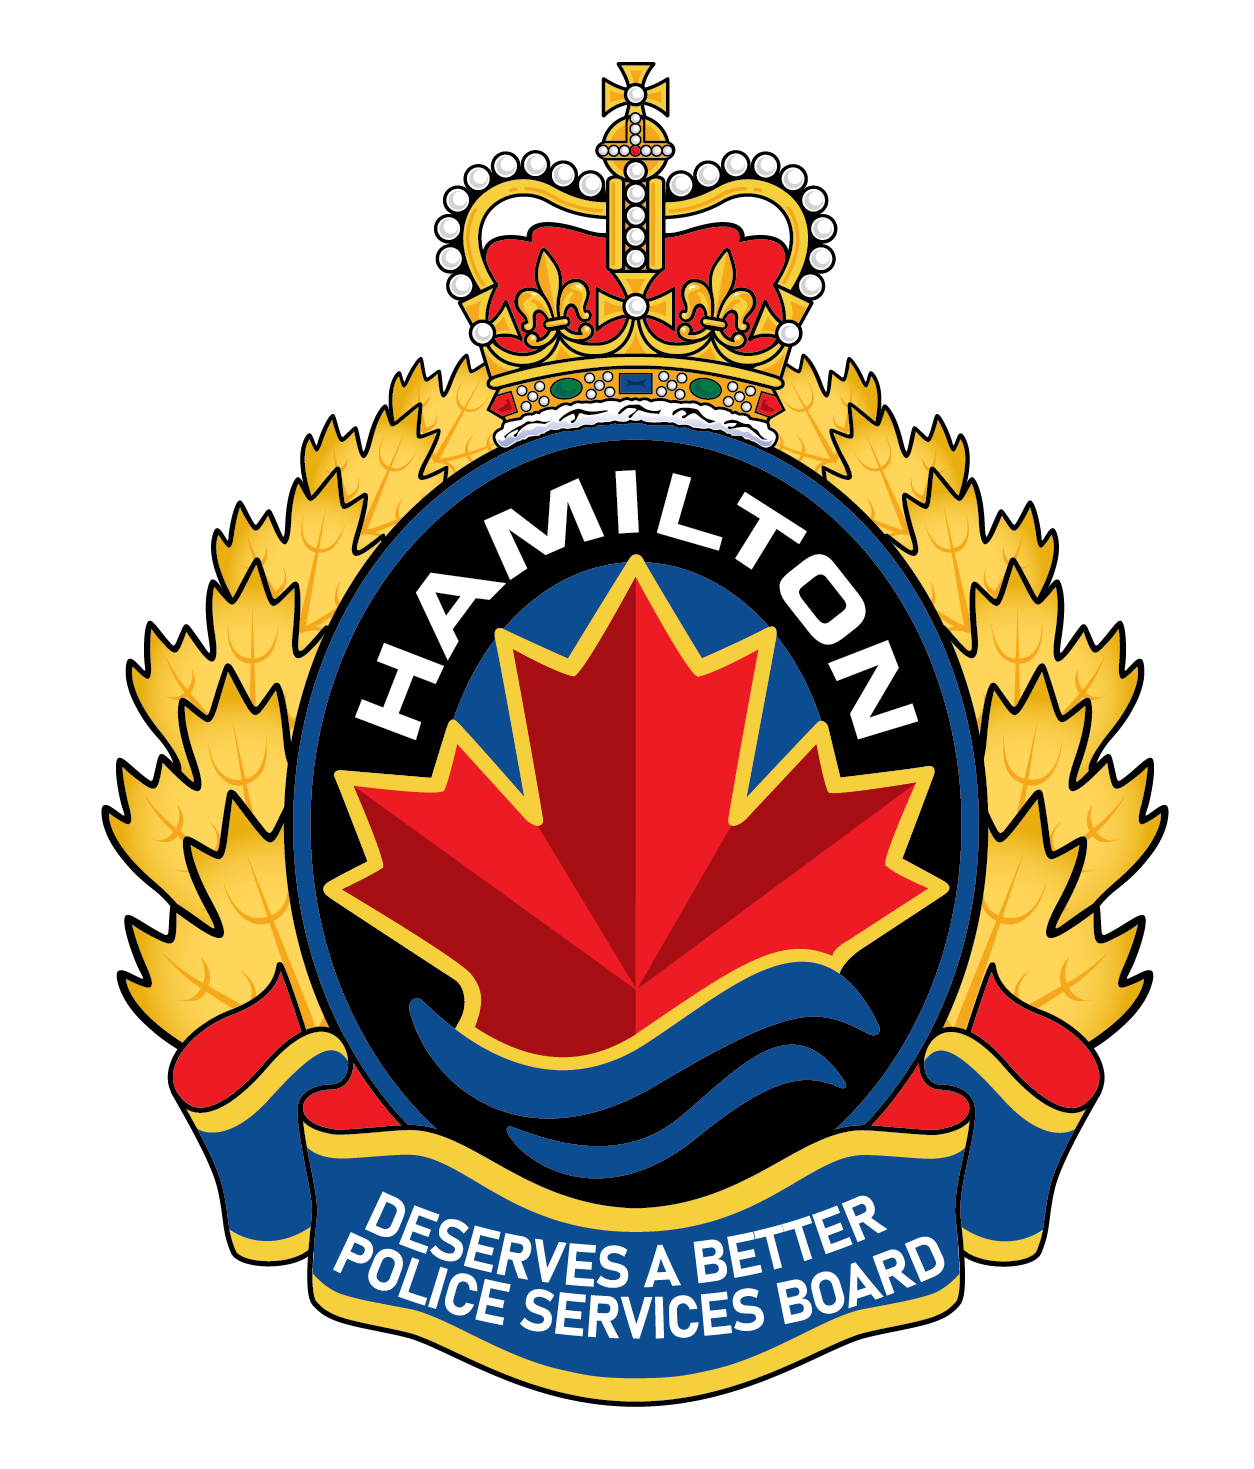 the words "Hamilton deserves a better police services board" written on the crest of the current police services board